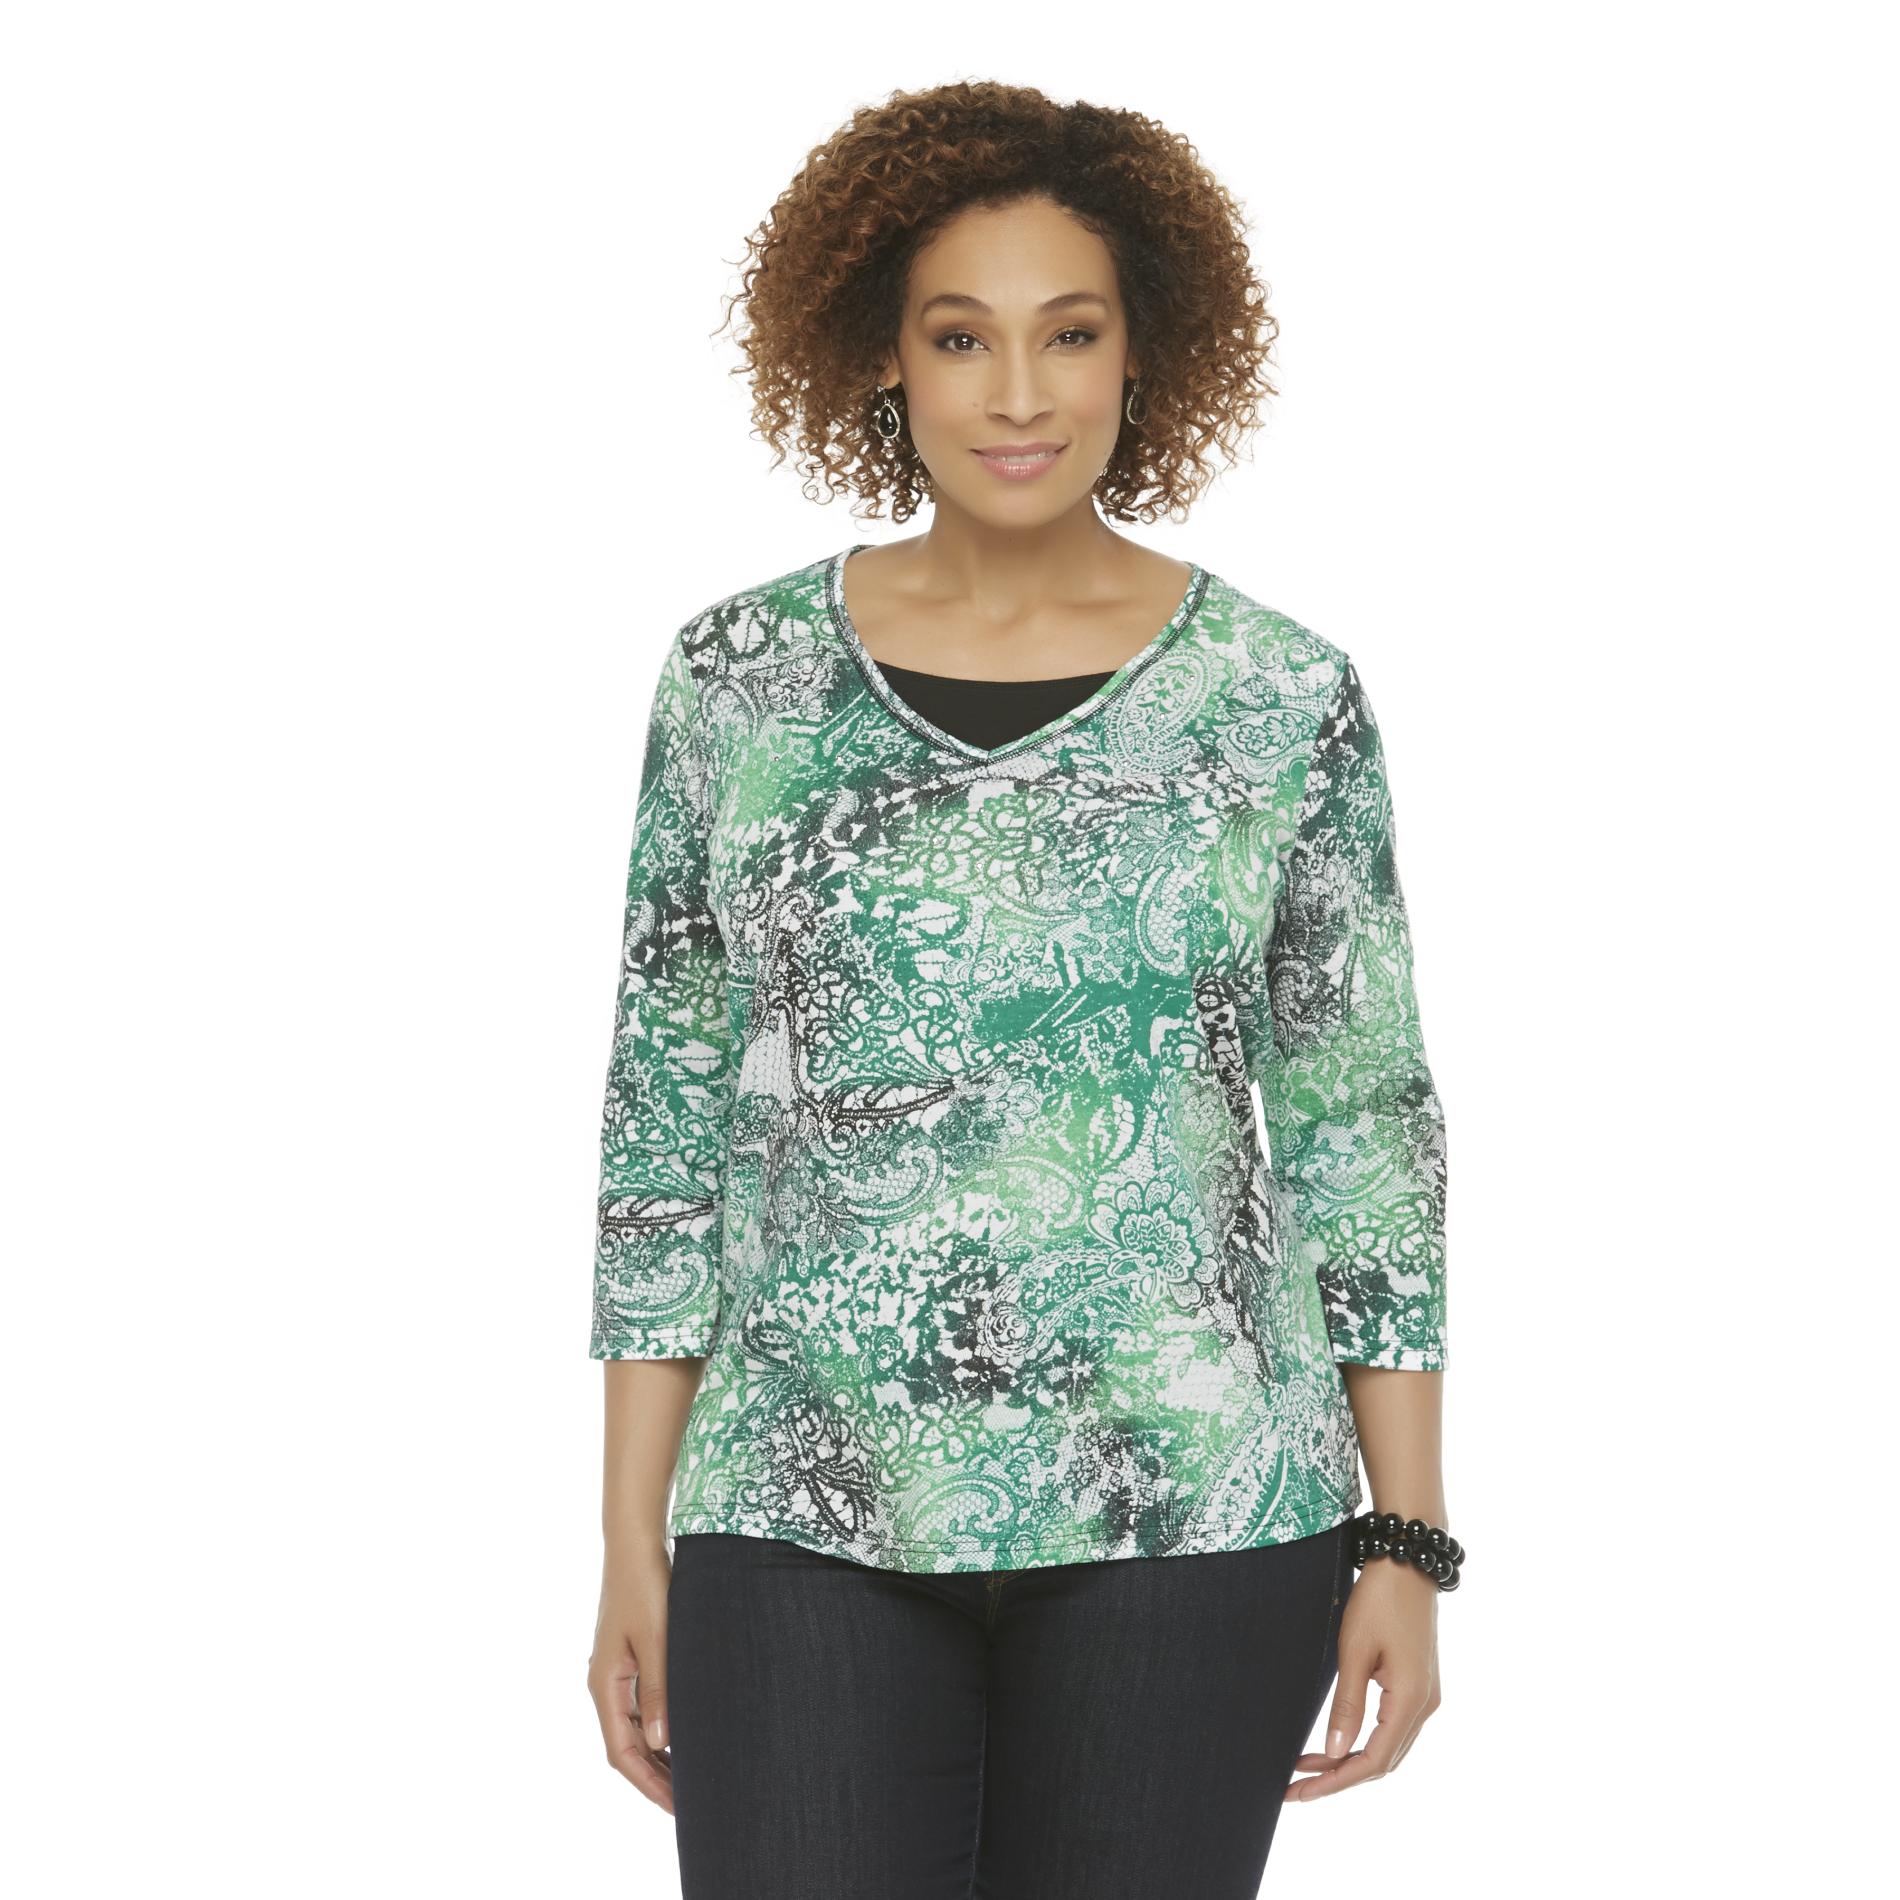 Basic Editions Women's Plus Embellished Layered-Look Top - Paisley